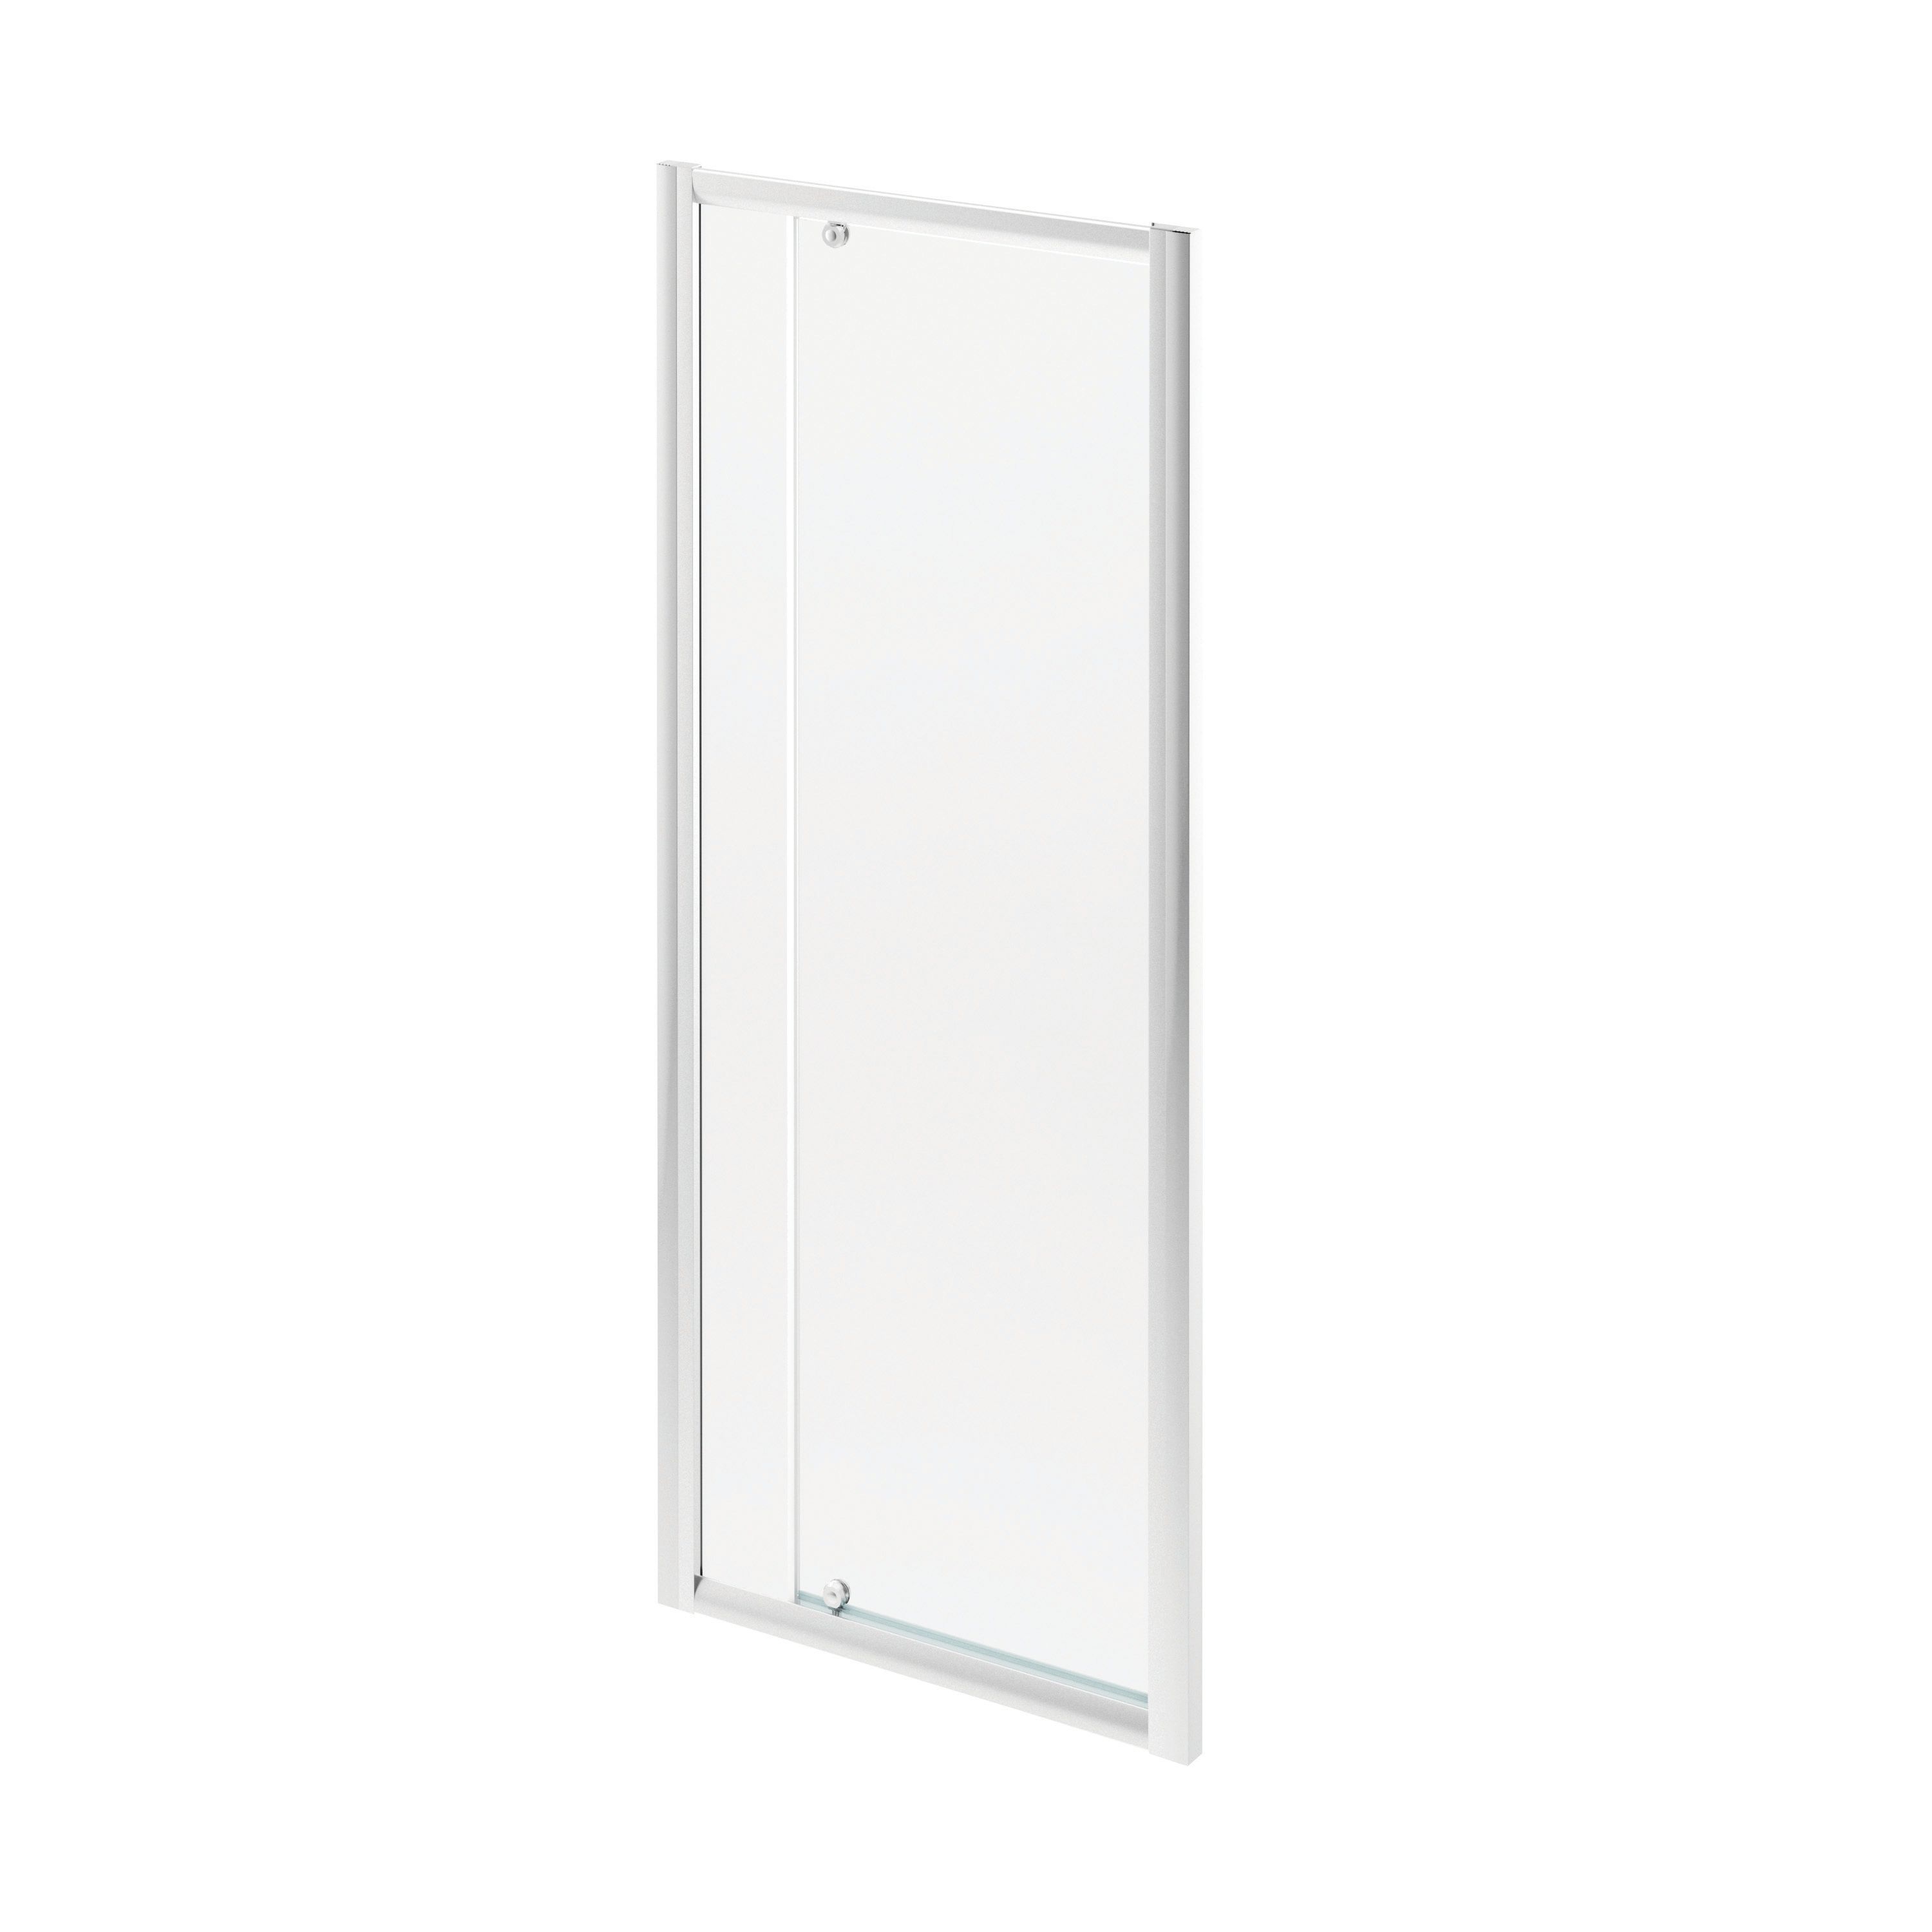 Image of Wickes Chrome Pivot Door Only - 1850 x 760mm